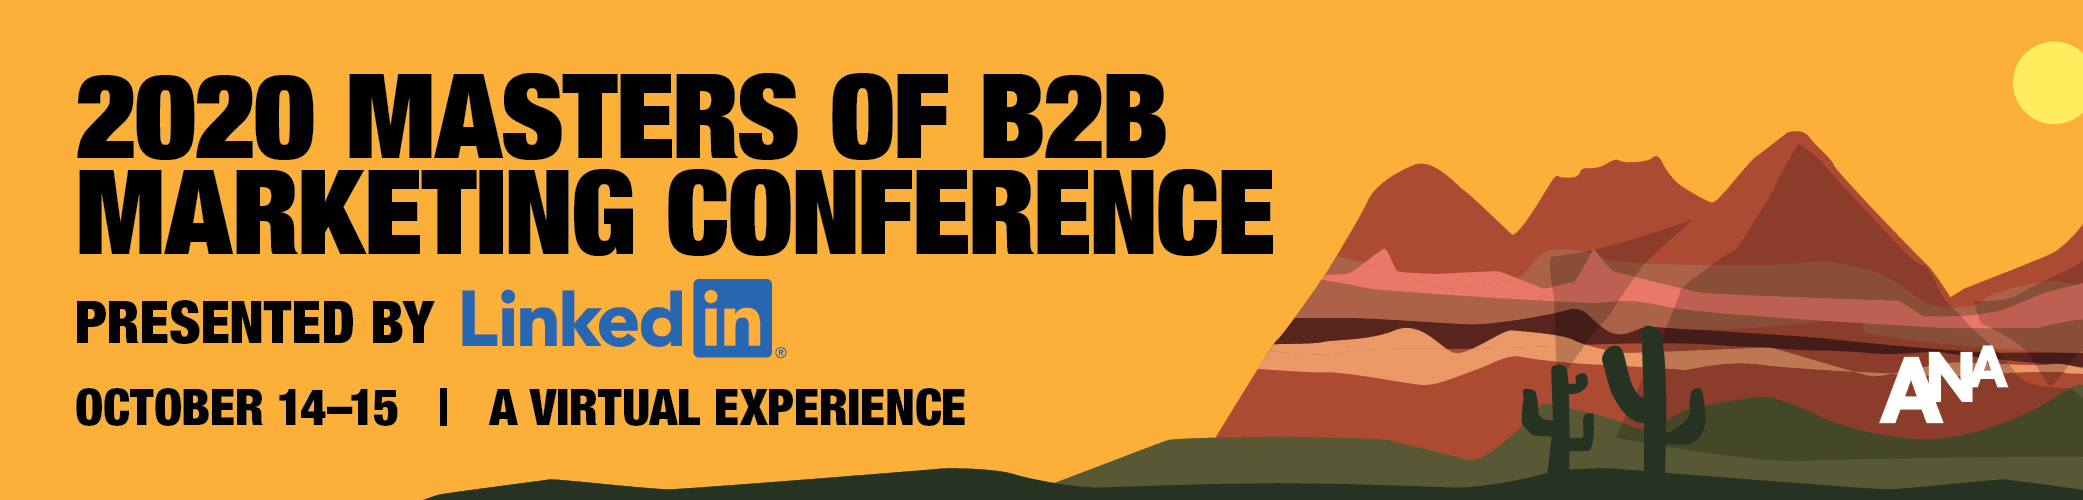 2020 Masters of B2B Marketing Conference Presented by LinkedIn: A Virtual Experience